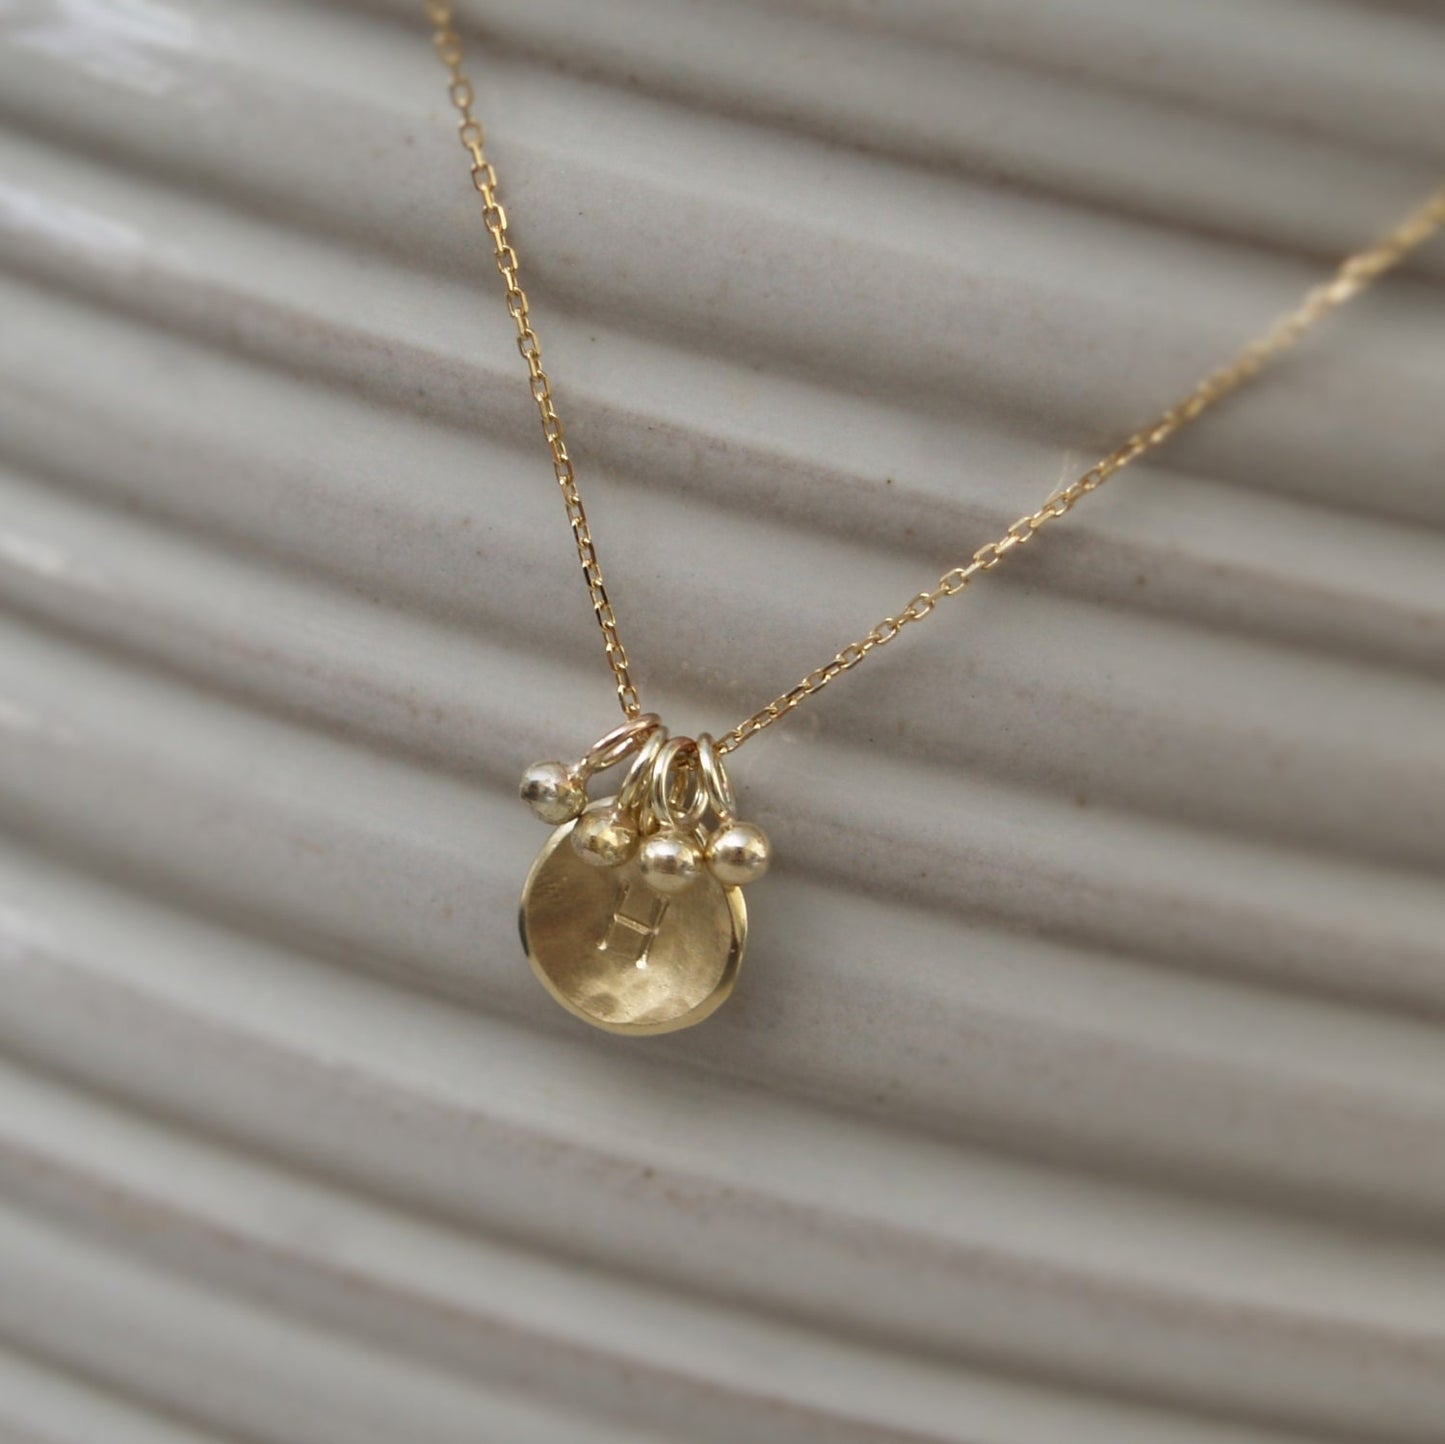 Handmade to order - 9ct solid yellow gold personalised small petal charm pendant with seed ball detail on a chain